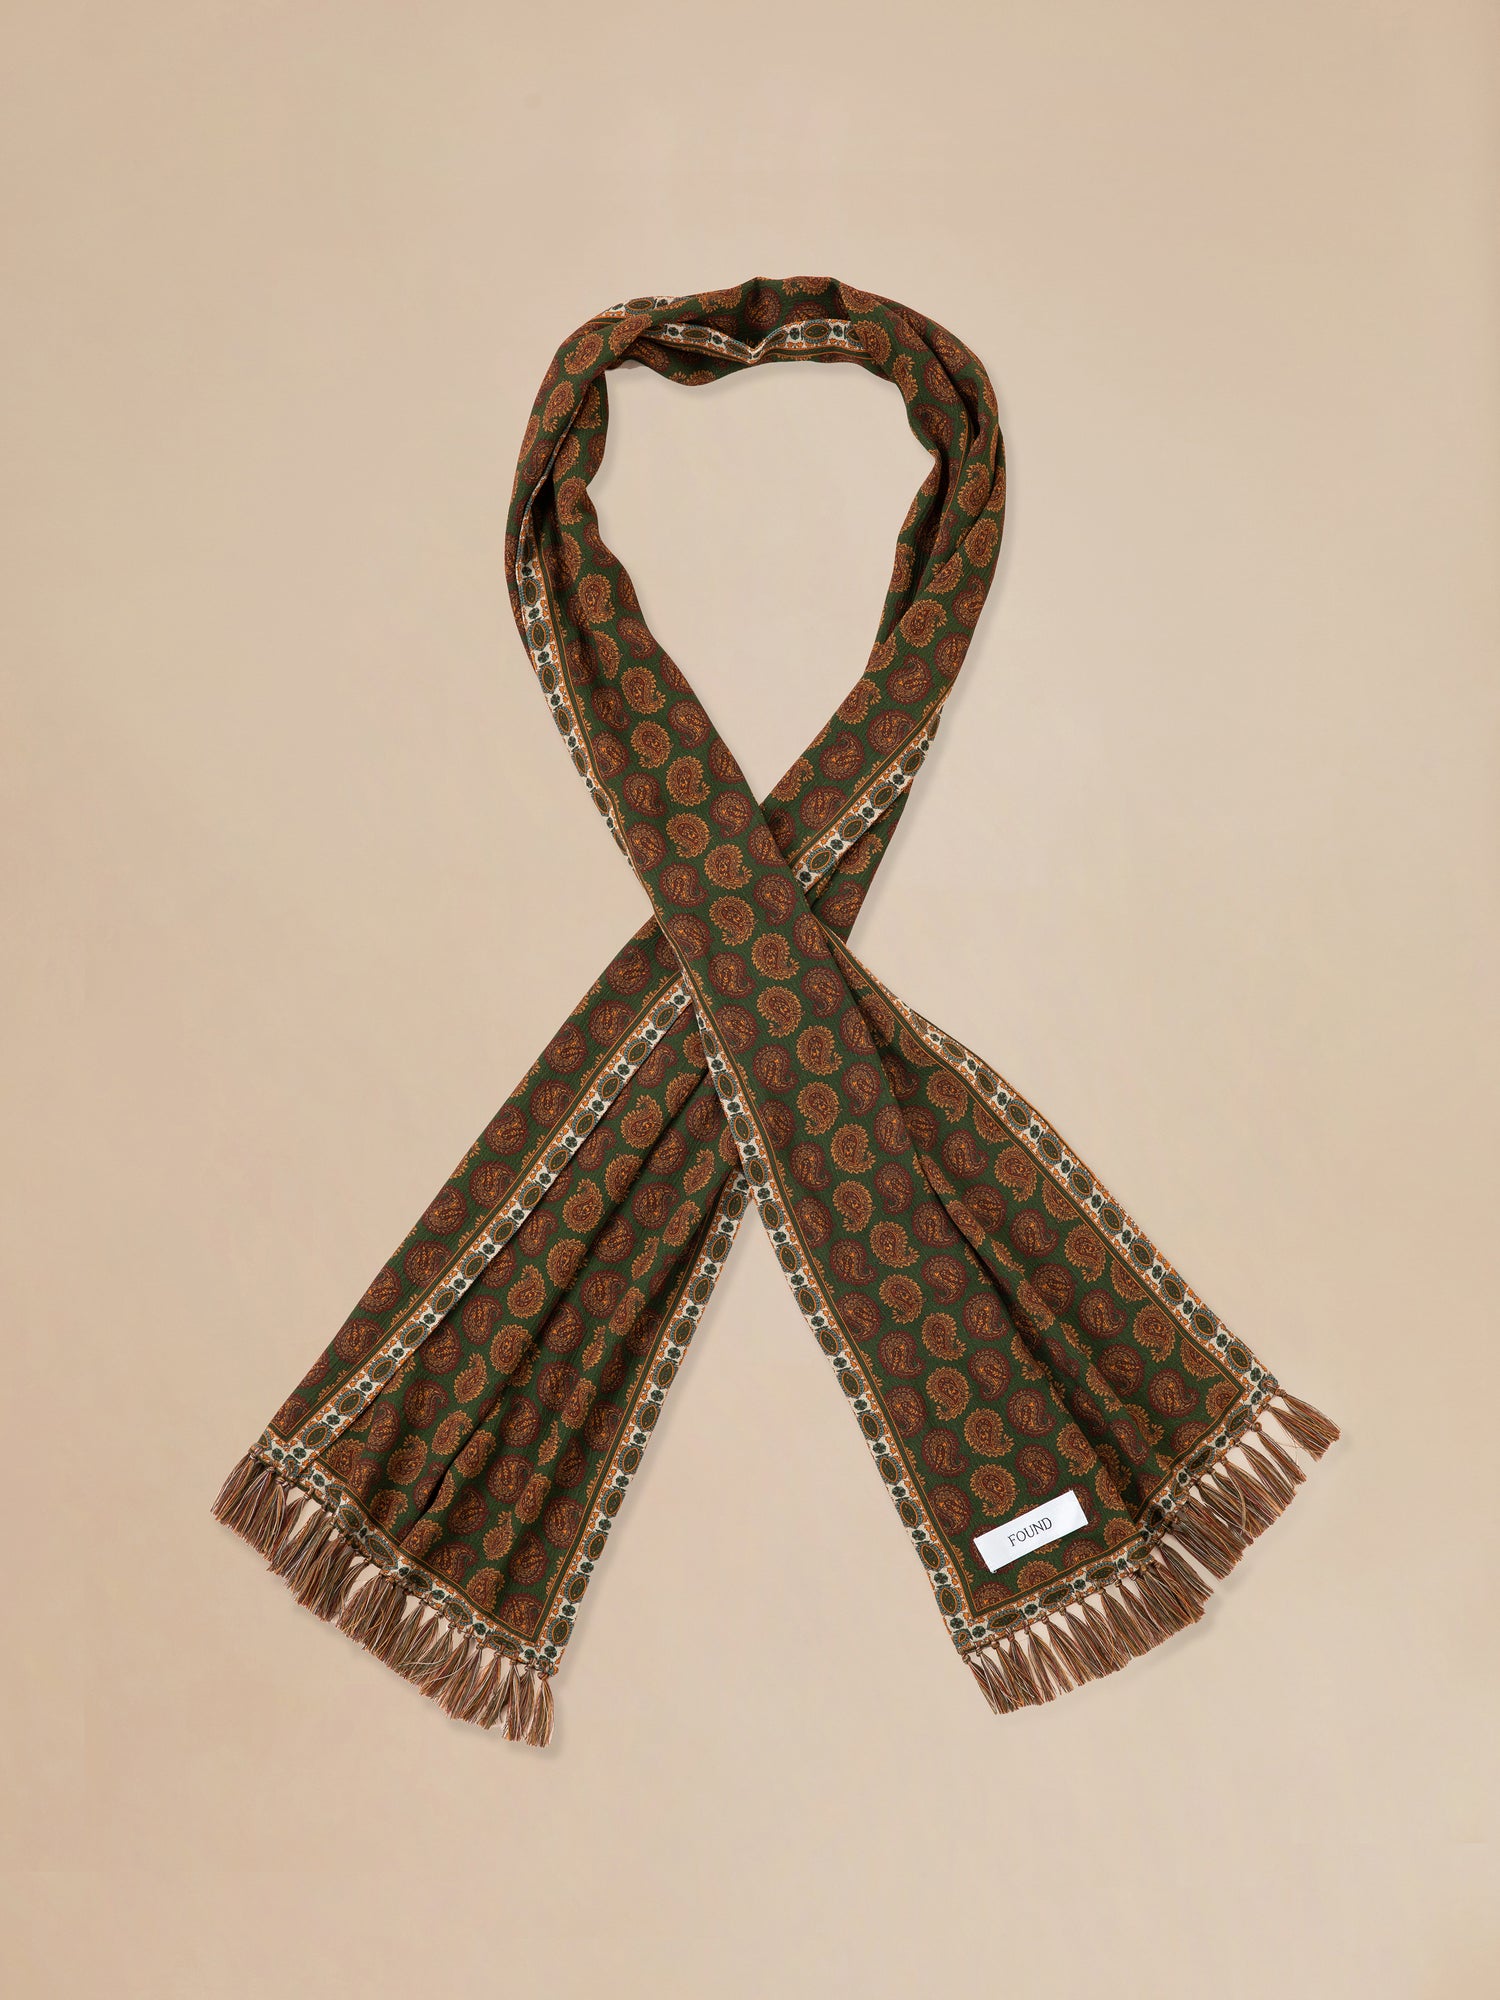 A Found Paisley Forest Scarf with hand-tied tassels.